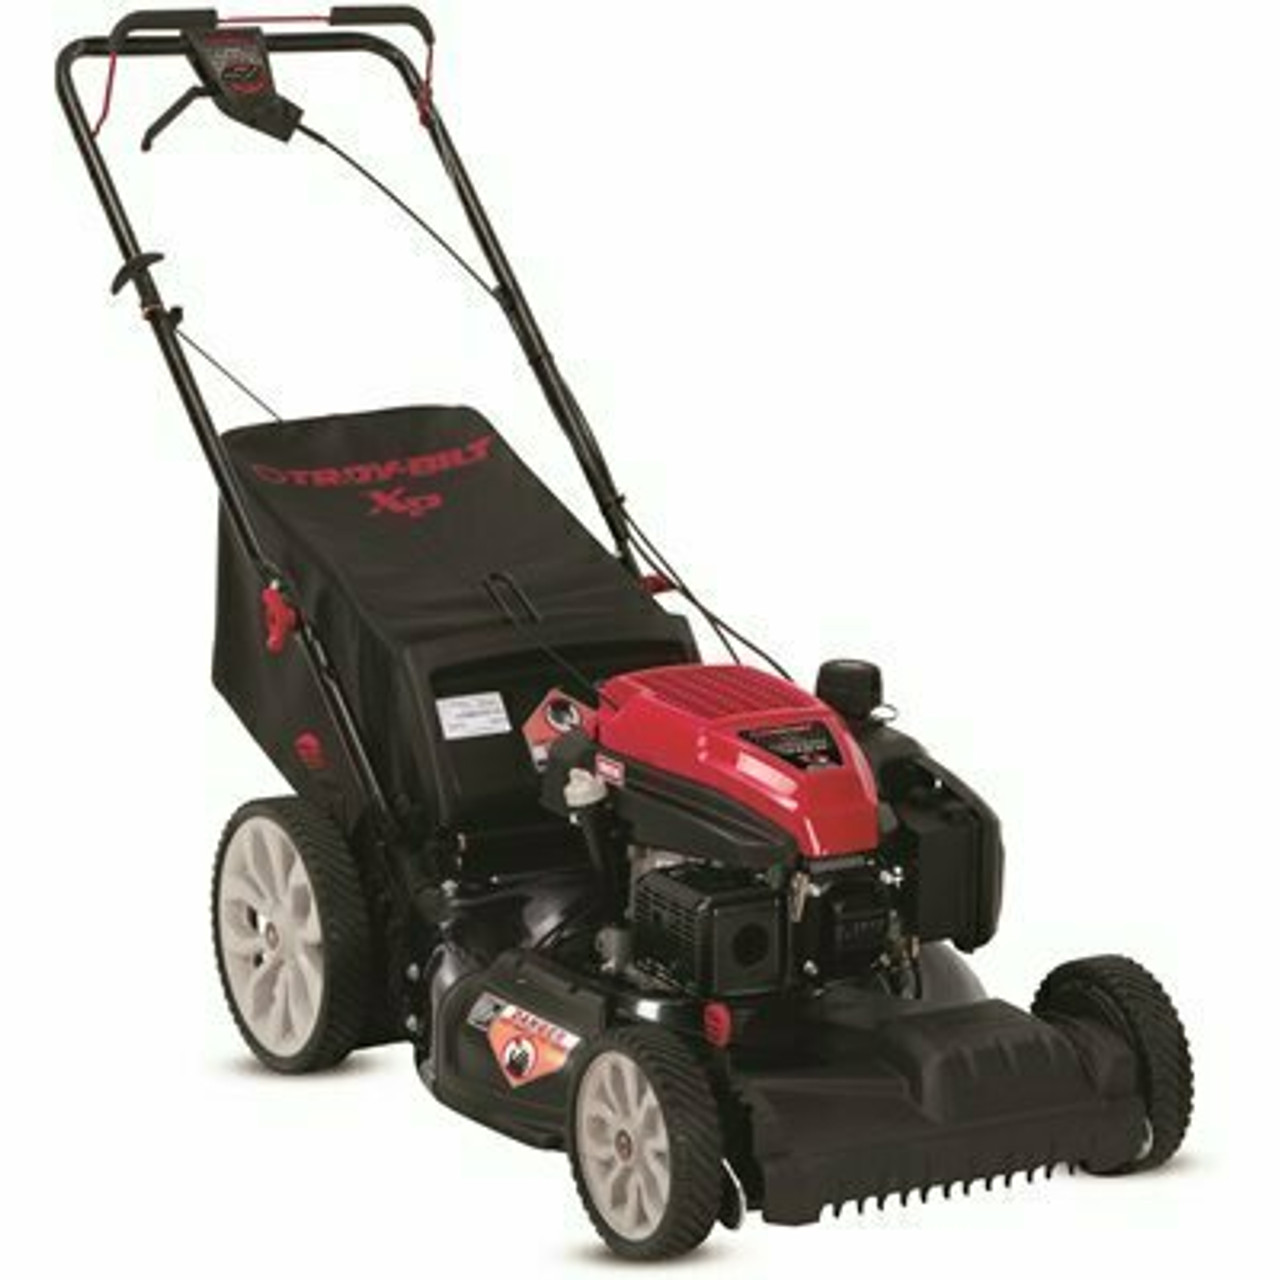 Troy-Bilt 21 In. 159Cc Check Don'T Change Engine 3-In-1 Gas Fwd Self Propelled Walk Behind Lawn Mower With High Rear Wheels